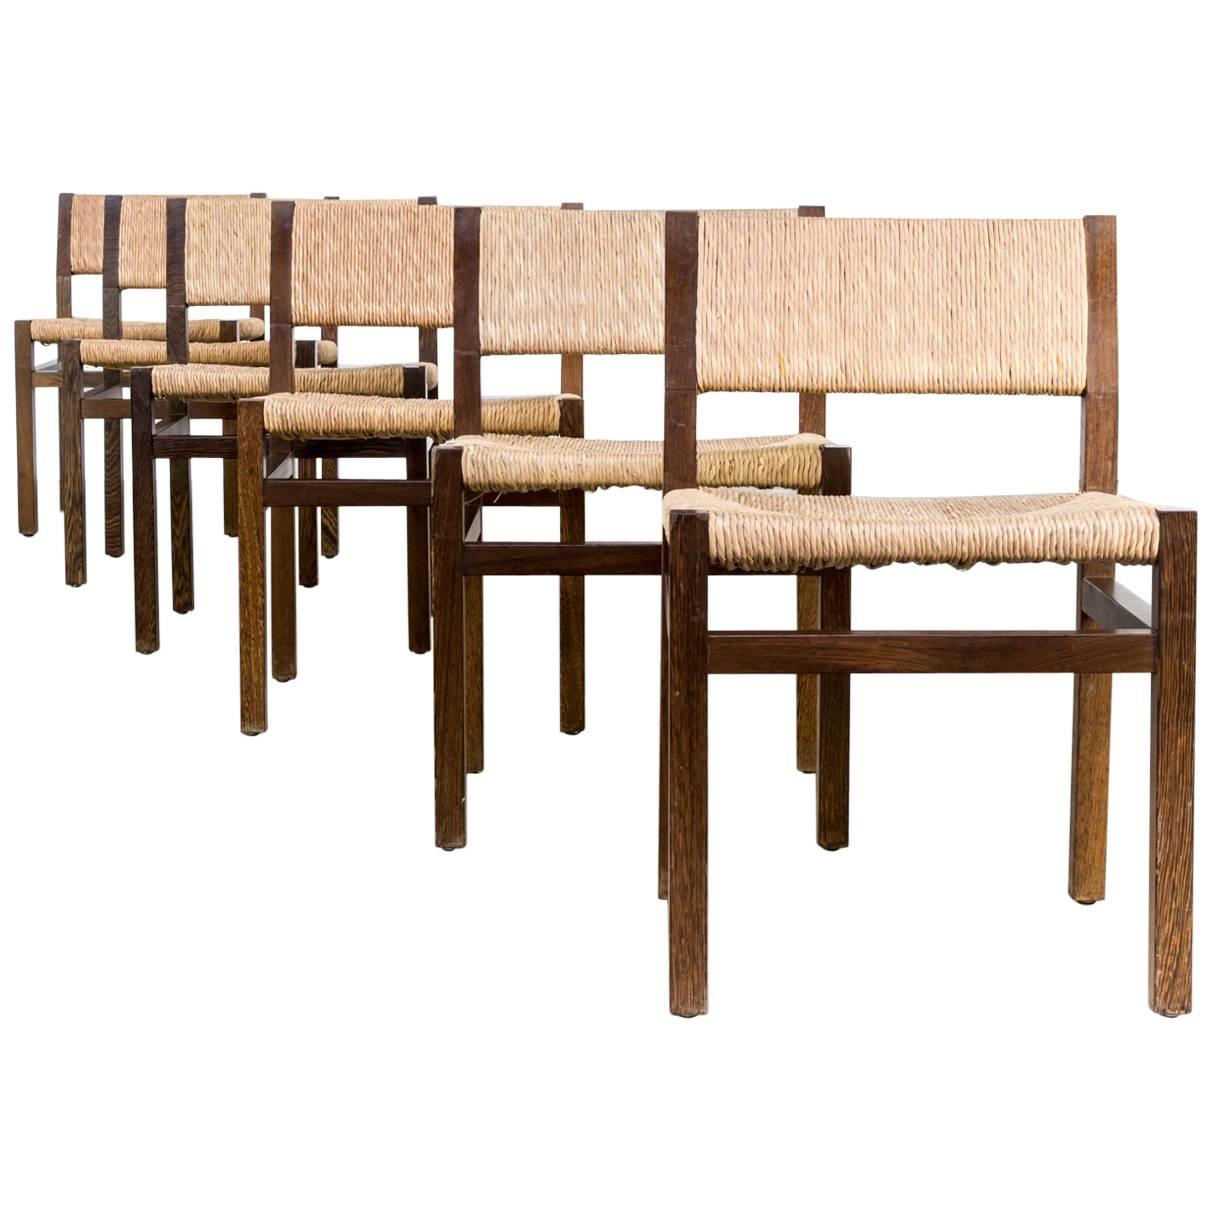 1960s Martin Visser Wengé Dining Chair for ’t Spectrum, Set of Six For Sale